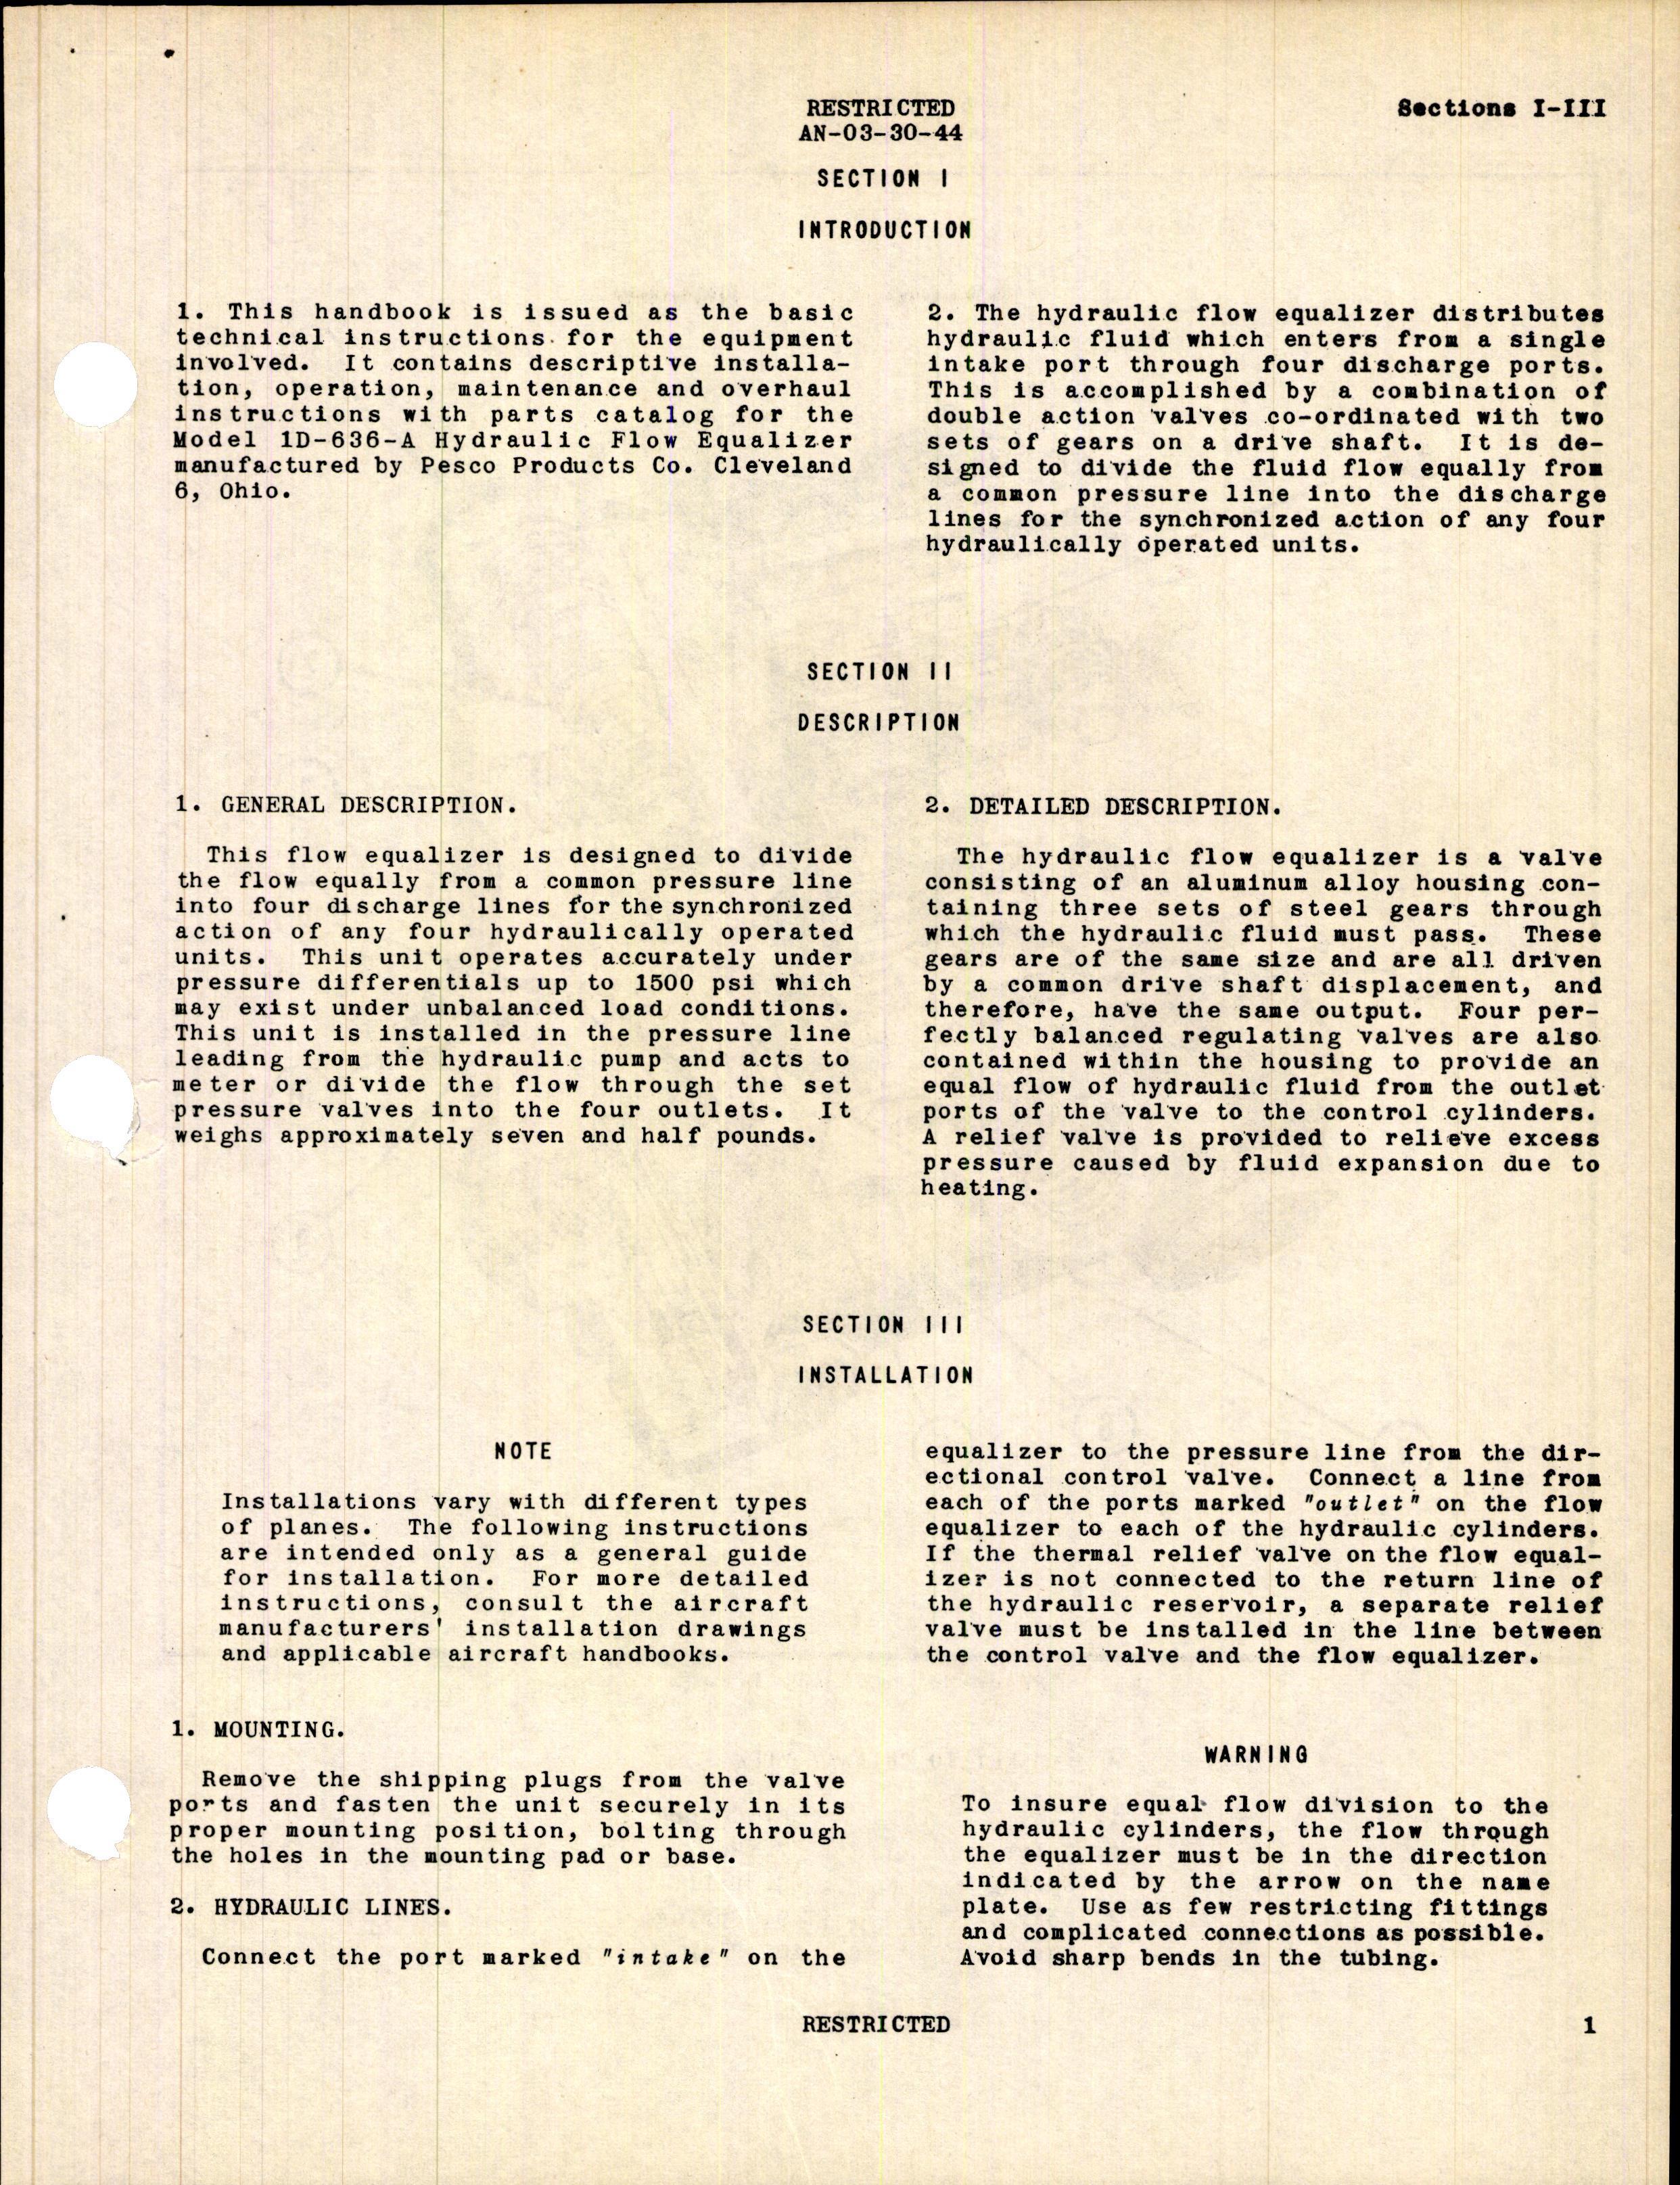 Sample page 5 from AirCorps Library document: Handbook of Instructions with Parts Catalog for Hydraulic Flow Equalizer